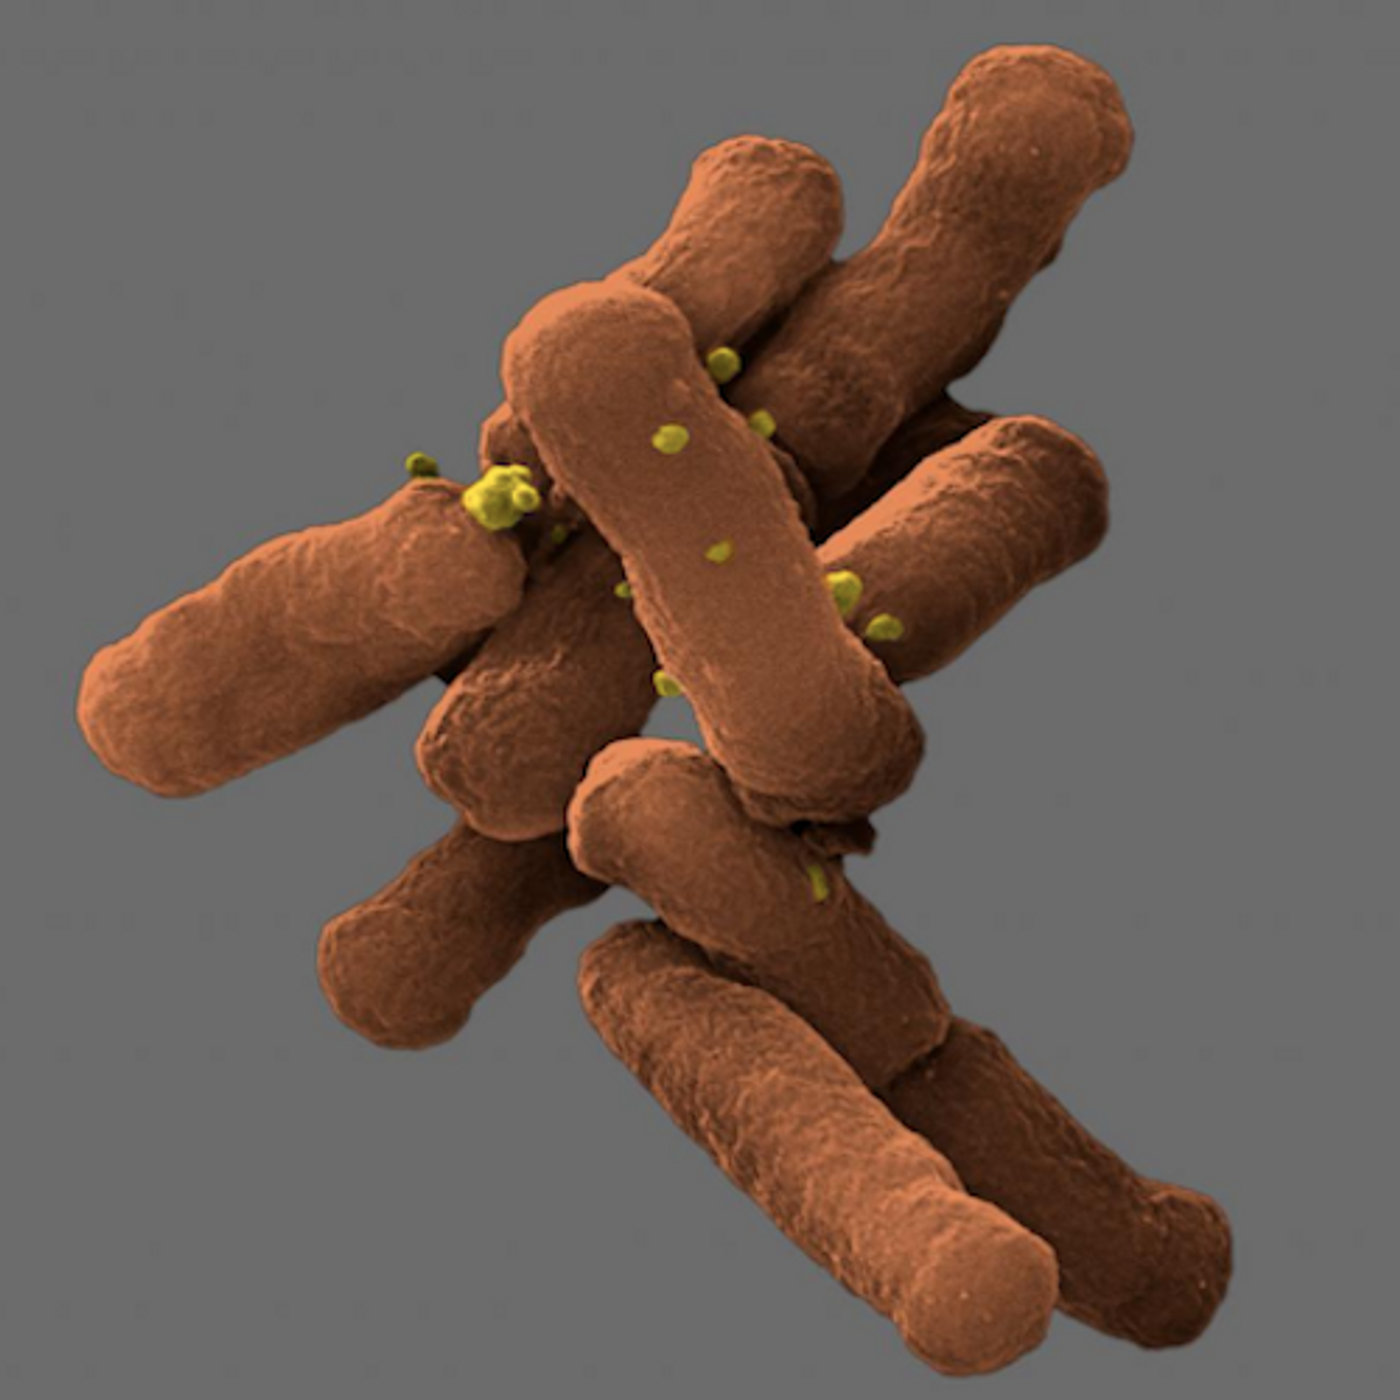 By isolating D. oralis, ORNL scientists could better understand how the microbes may have adapted and evolved to become dependent on other oral bacteria, as well as how losing or acquiring genes can make them friend or foe./ Credit: Karissa Cross/Oak Ridge National Laboratory, US Dept. of Energy